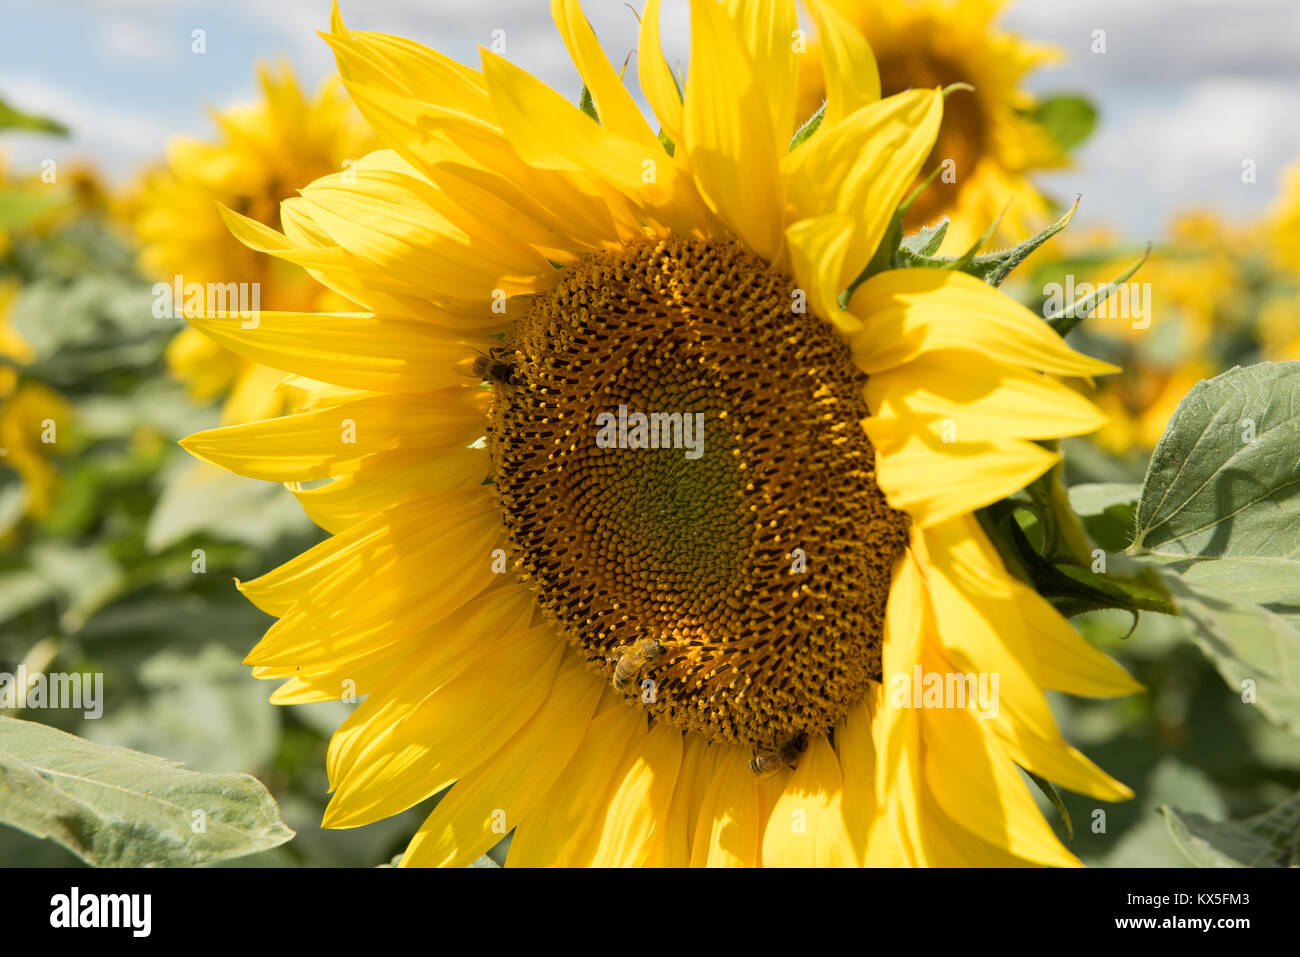 Sunflower field in Surgeres France Stock Photo